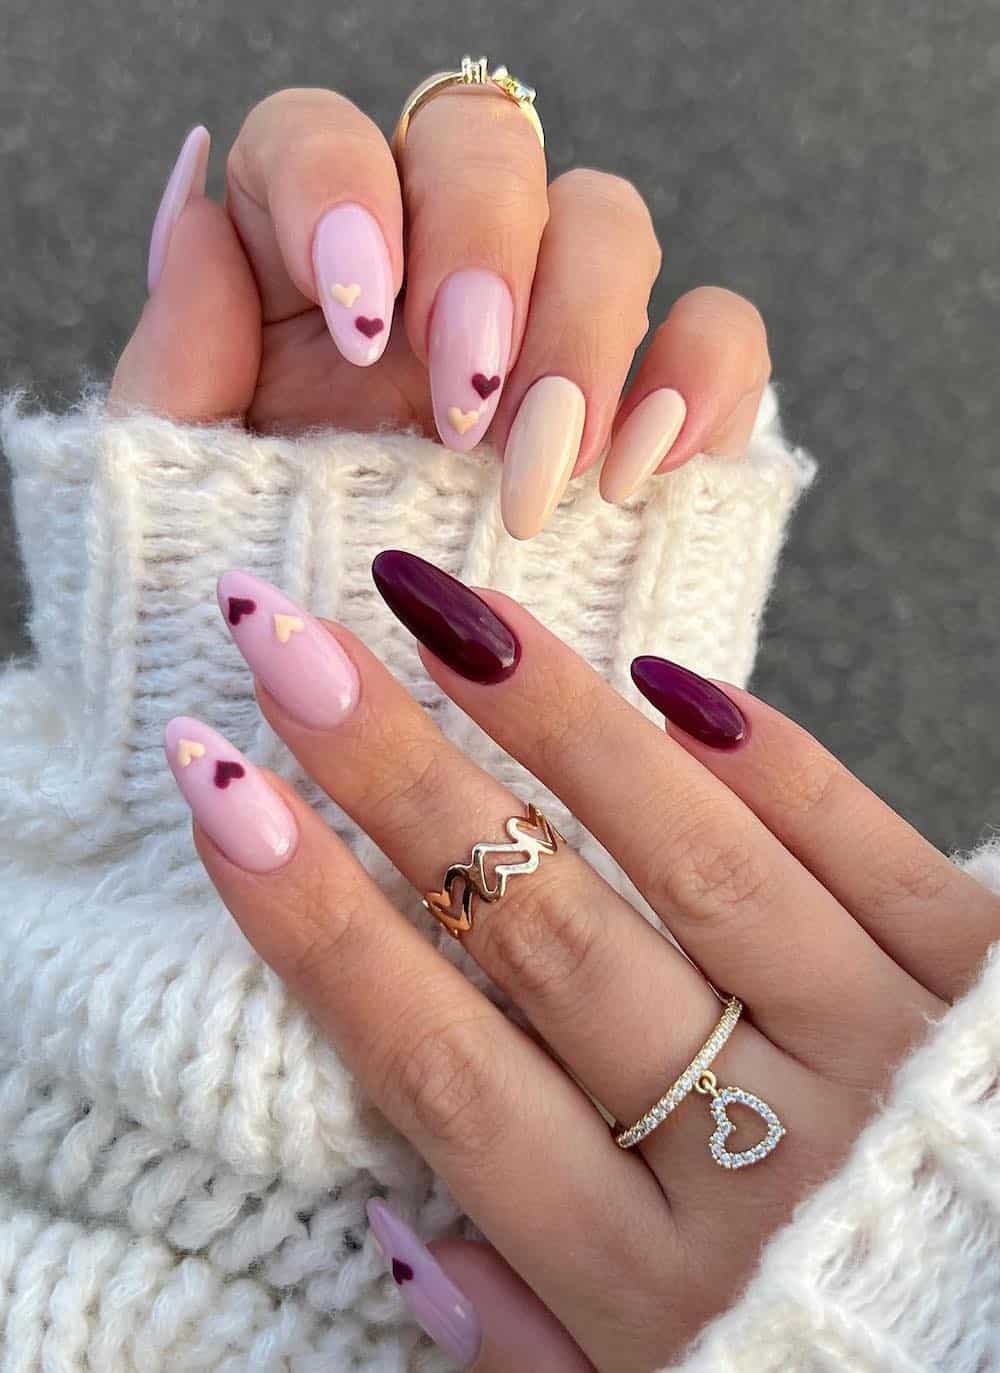 A hand with long almond nails painted a nude pink with beige and deep red accent nails and heart details